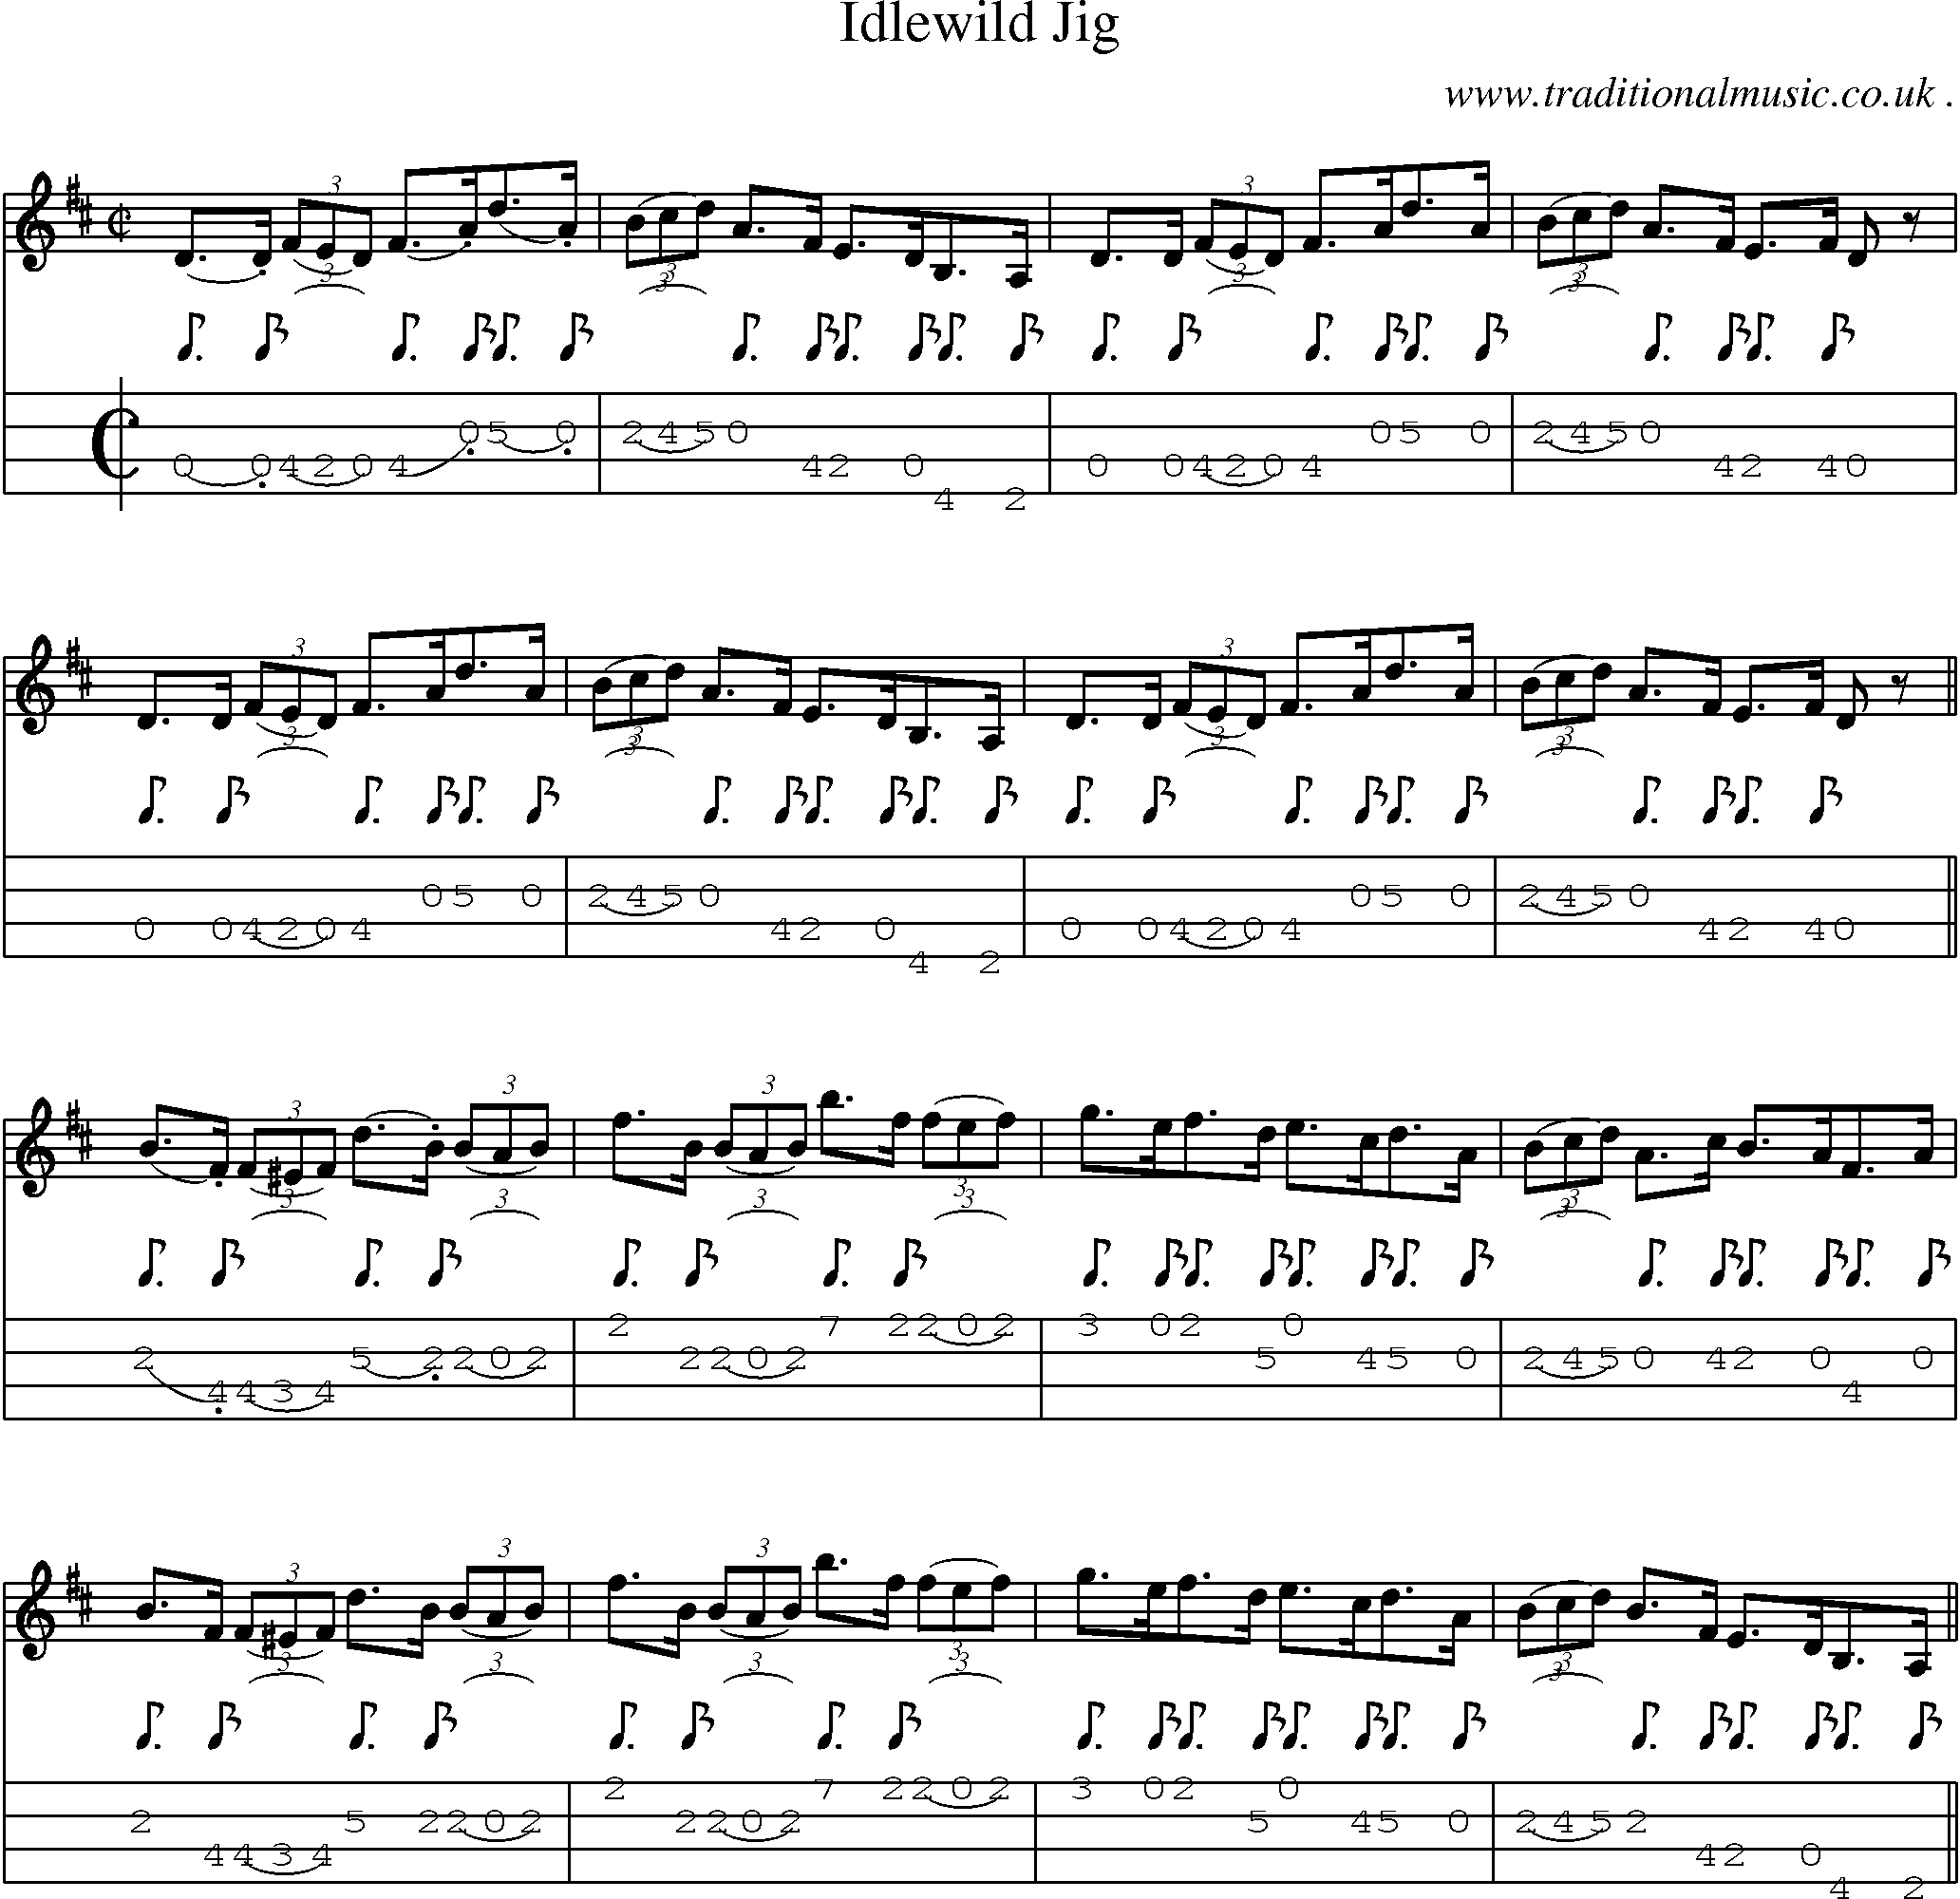 Sheet-Music and Mandolin Tabs for Idlewild Jig